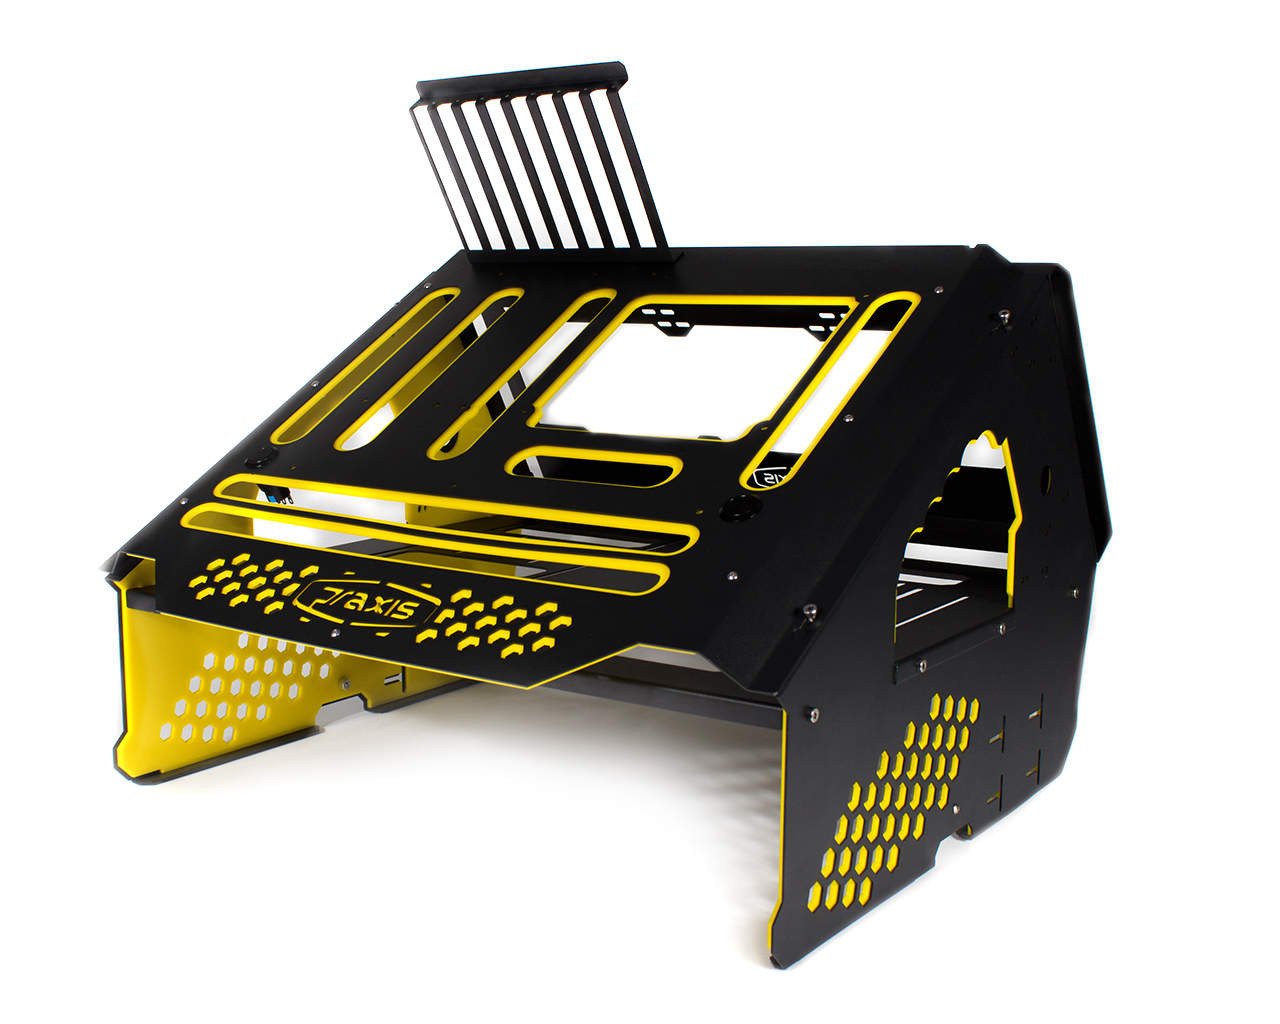 PrimoChill's Praxis Wetbench Powdercoated Steel Modular Open Air Computer Test Bench for Watercooling or Air Cooled Components - PrimoChill - KEEPING IT COOL Black w/Solid Yellow Accents